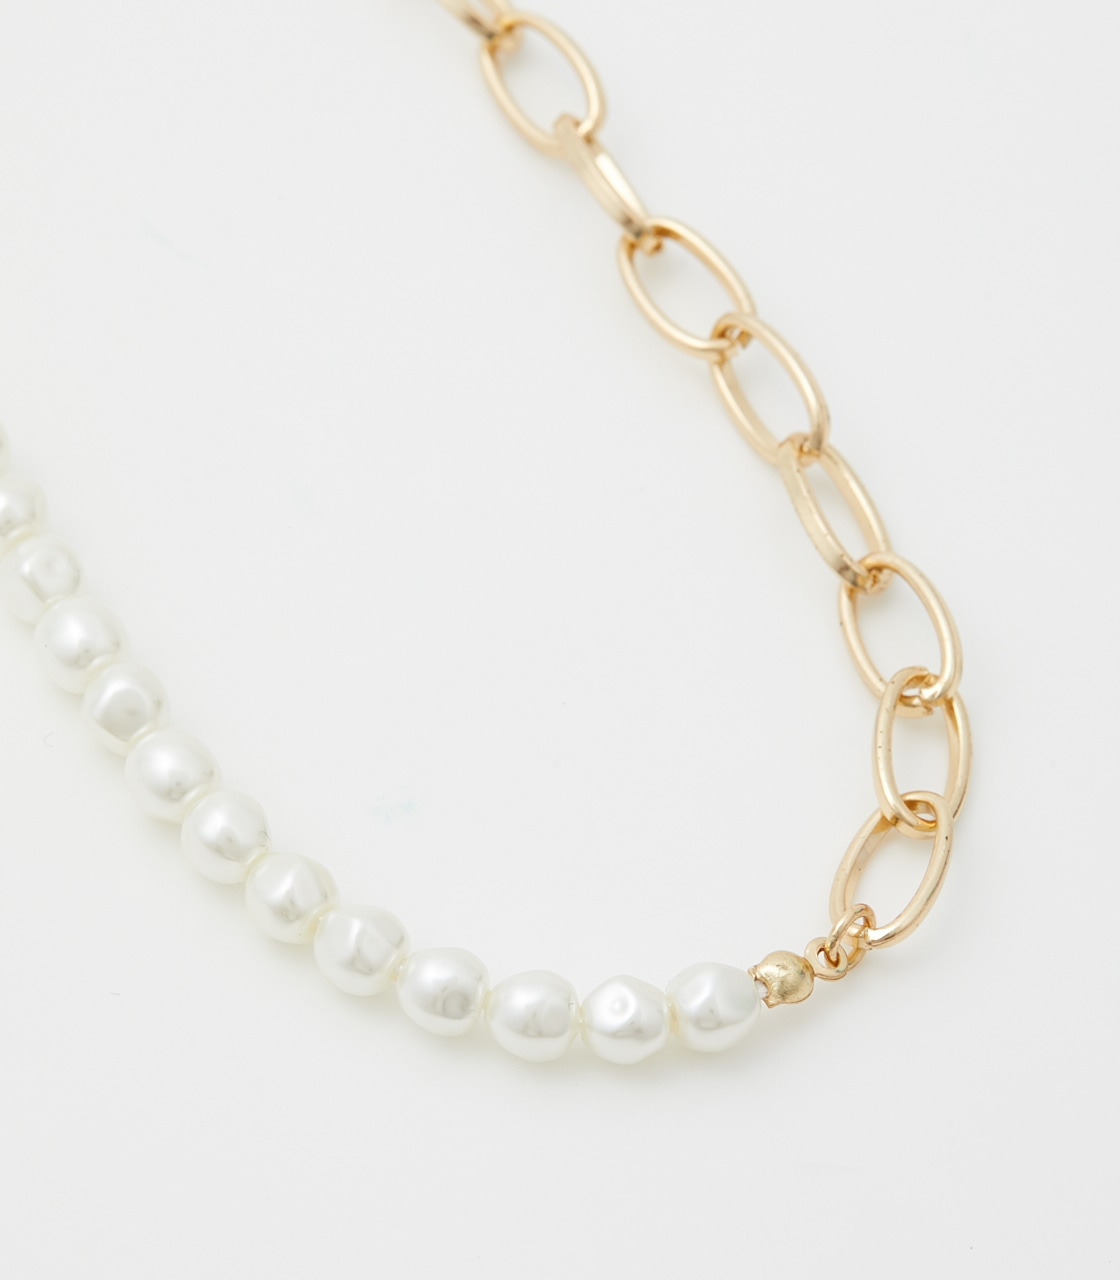 FAUX PEARL×CHAIN NECKLACE/フェイクパール×チェーンネックレス 詳細画像 L/GLD 2